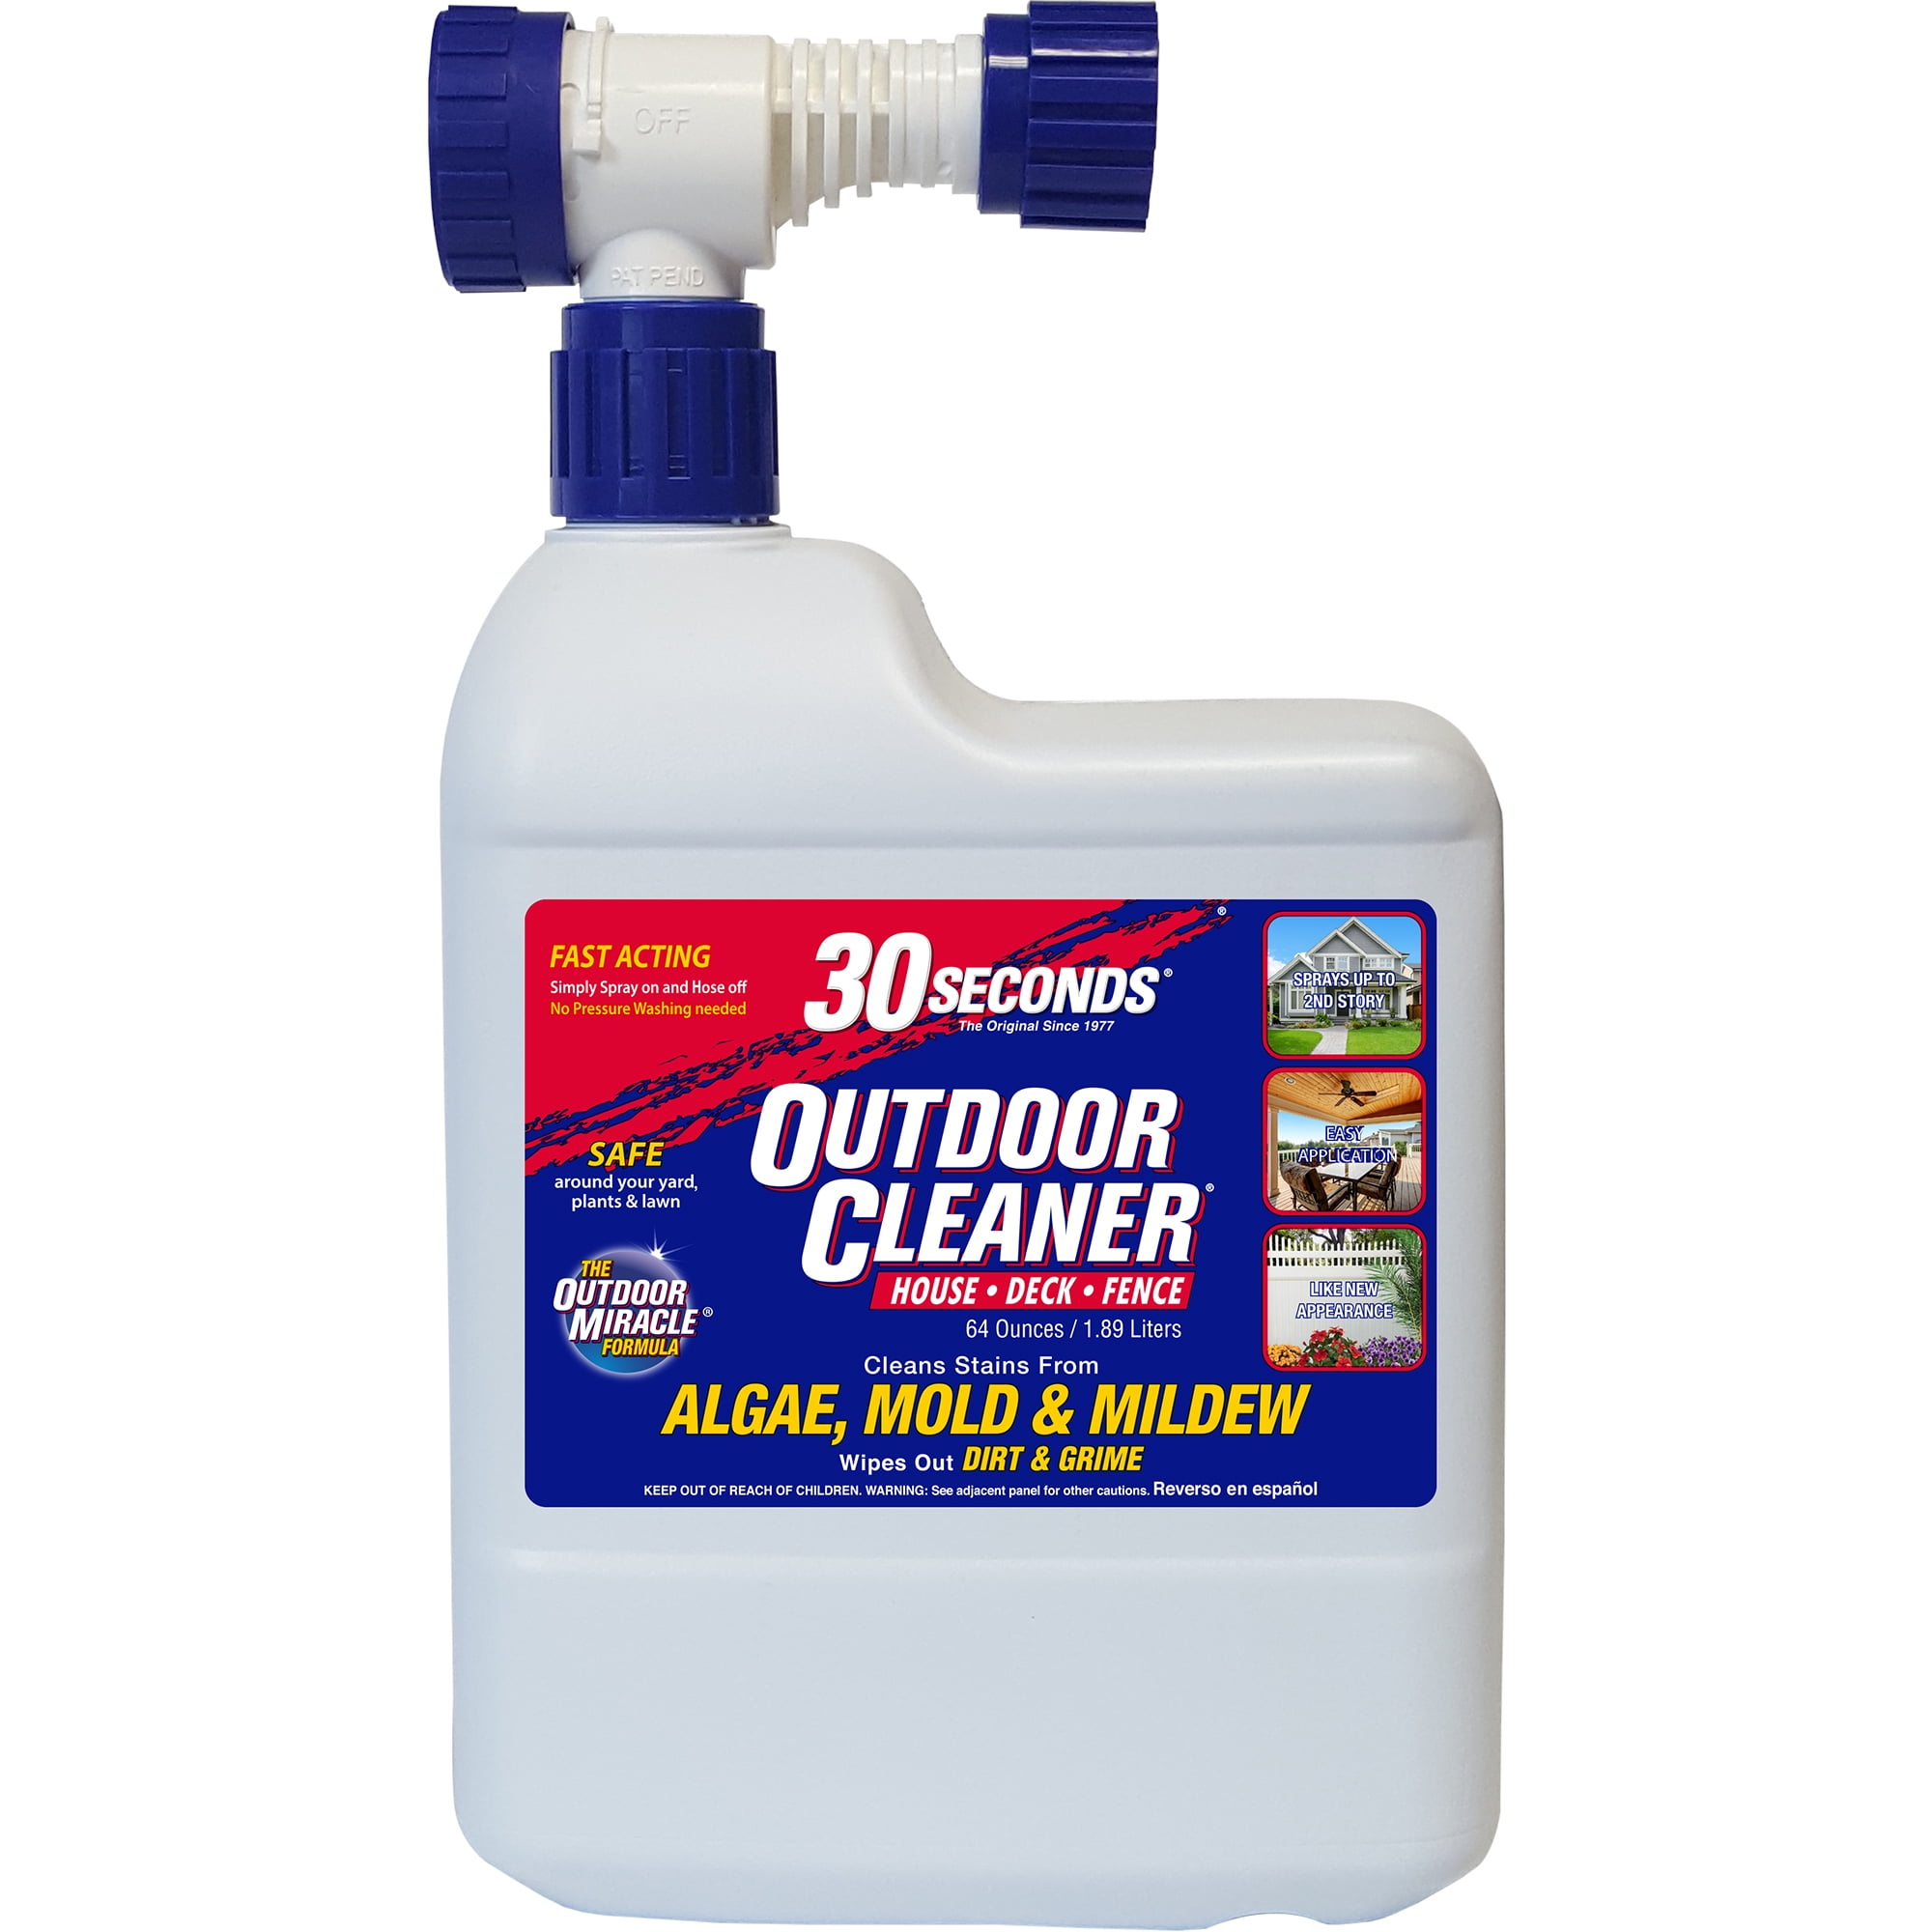 30 SECONDS Outdoor Cleaner for Stains from Algae, Mold and Mildew,  Ready-to-Spray, 64 oz.